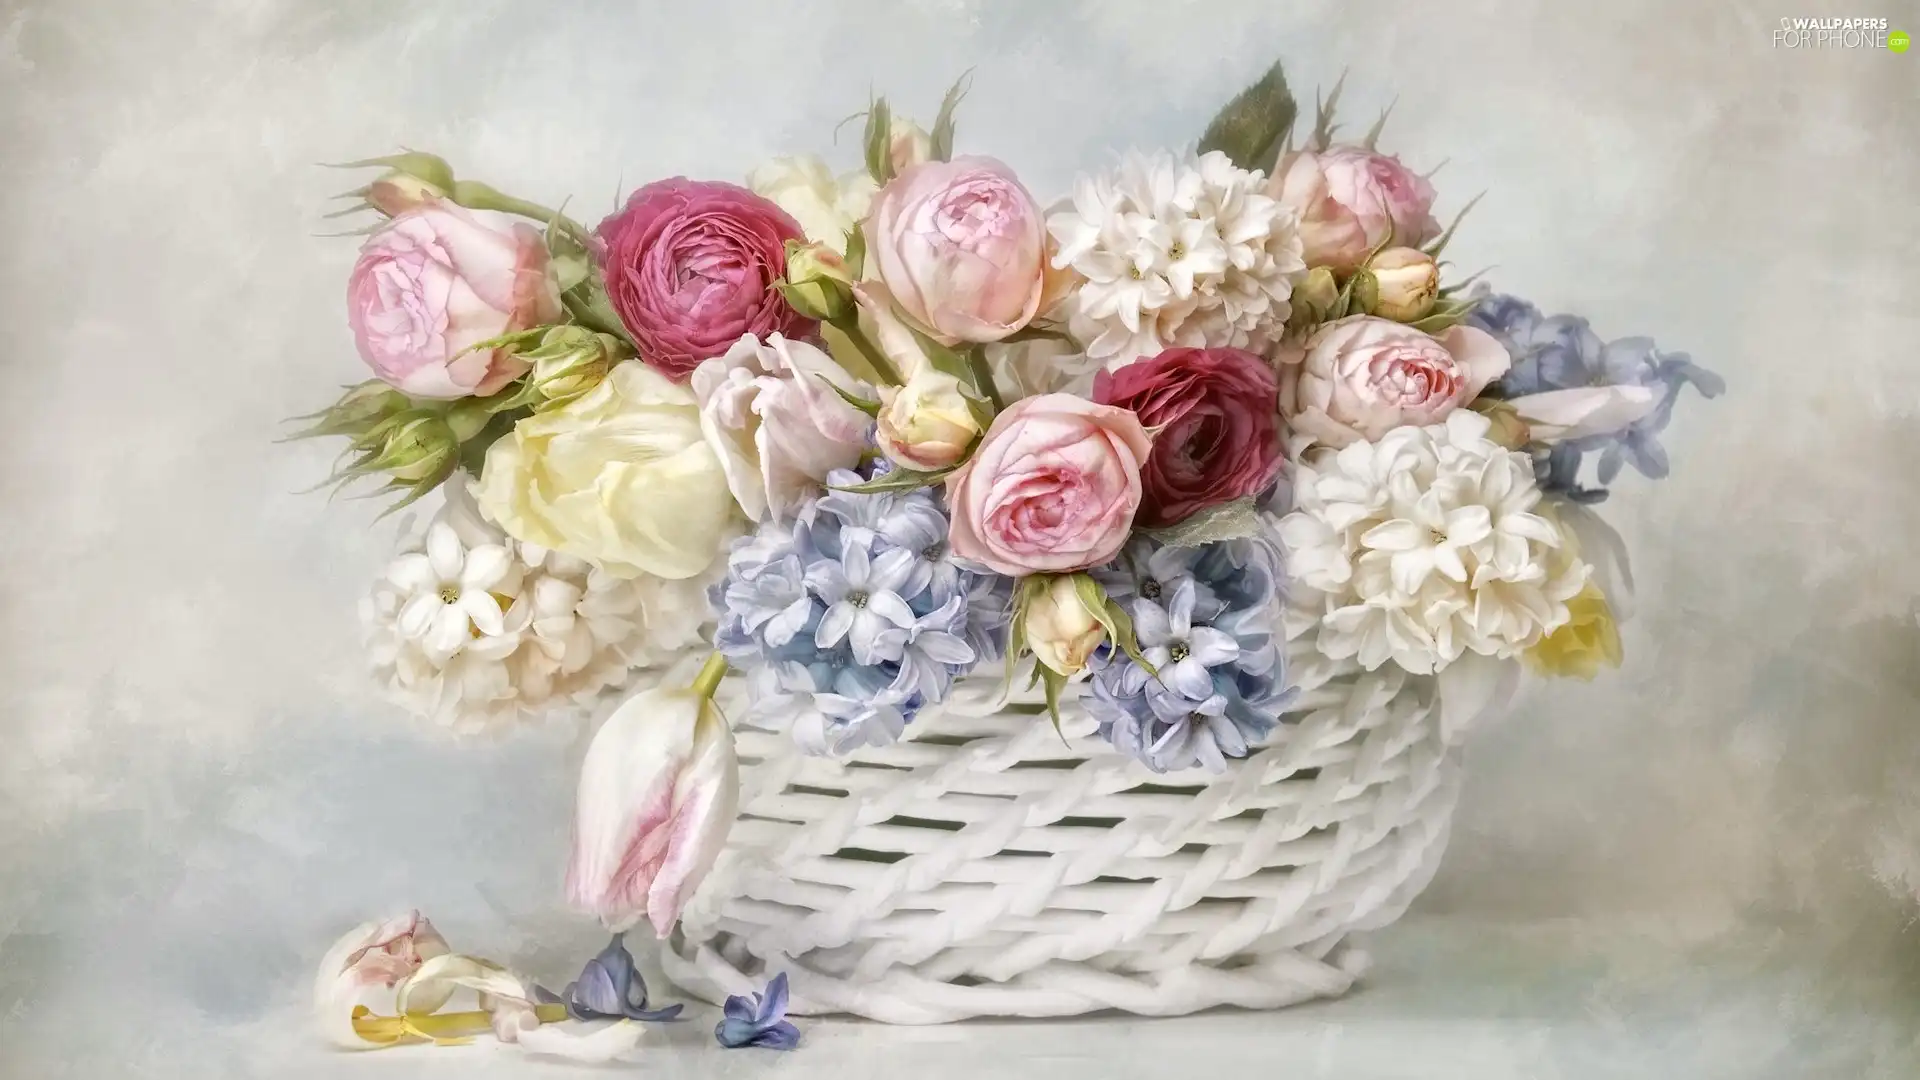 roses, Hyacinths, Bouquet of Flowers, basket, graphics